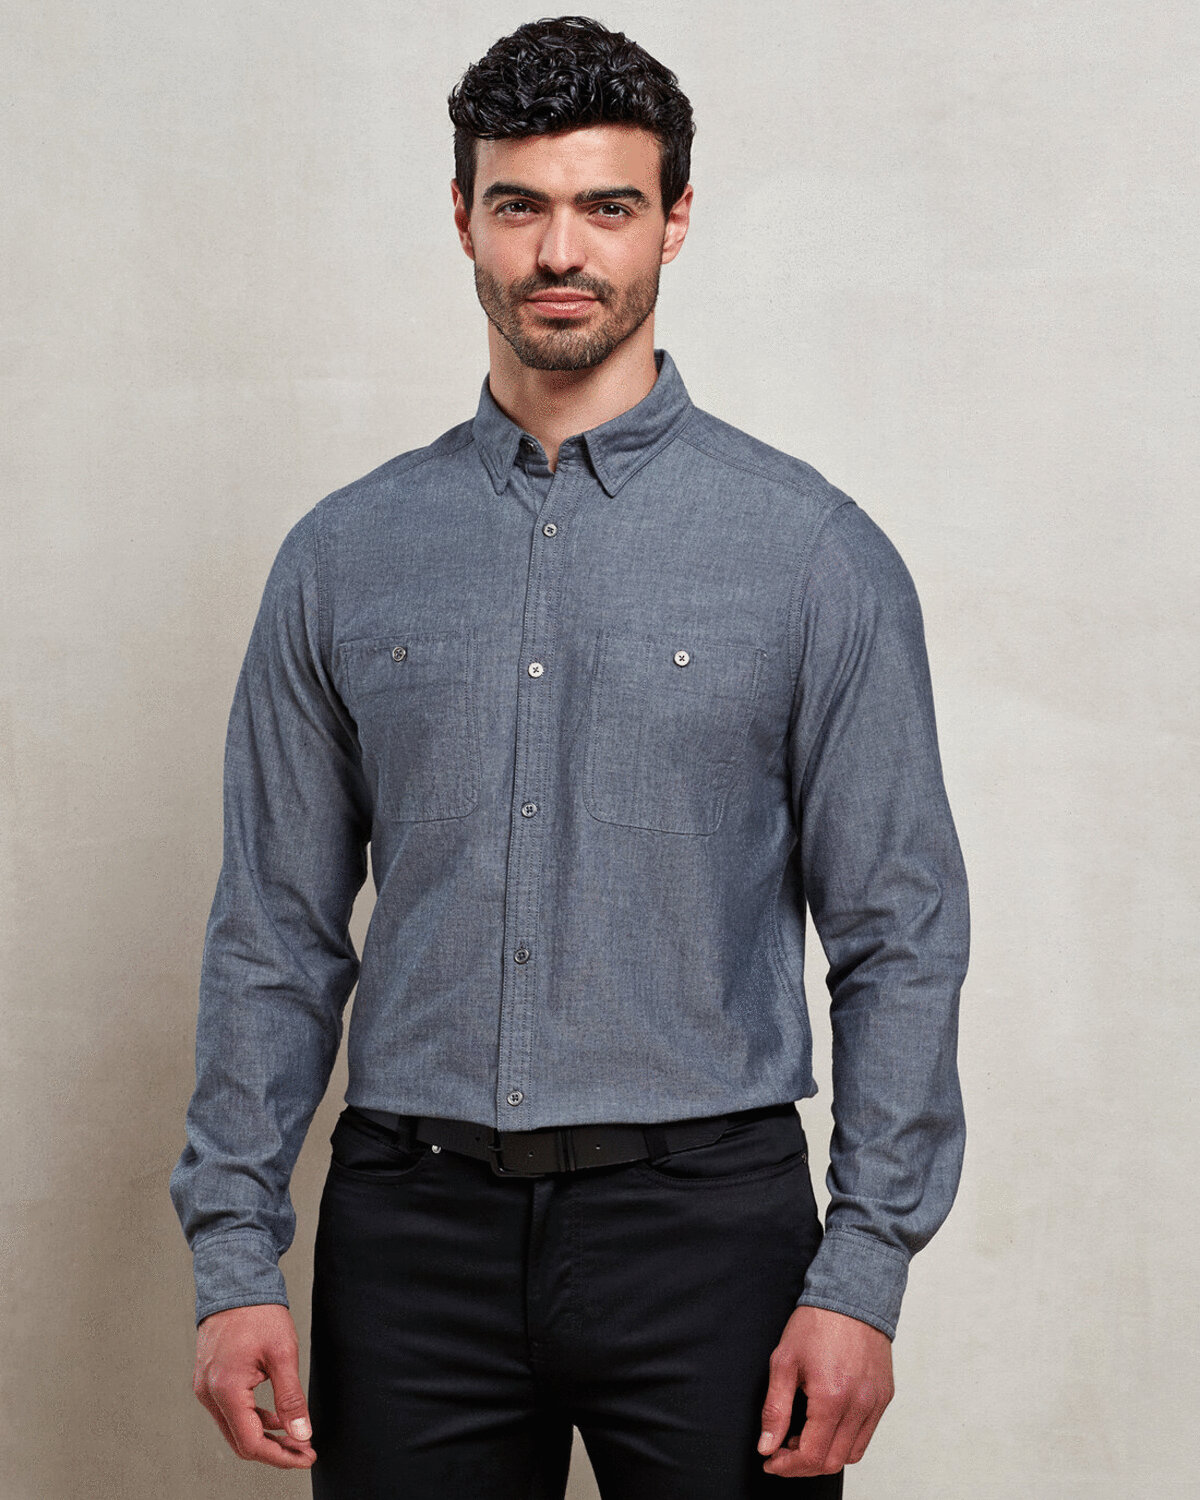 FAIRTRADE AND ORGANIC CERTIFIED MENS LONG SLEEVE CHAMBRAY COTTON SHIRT